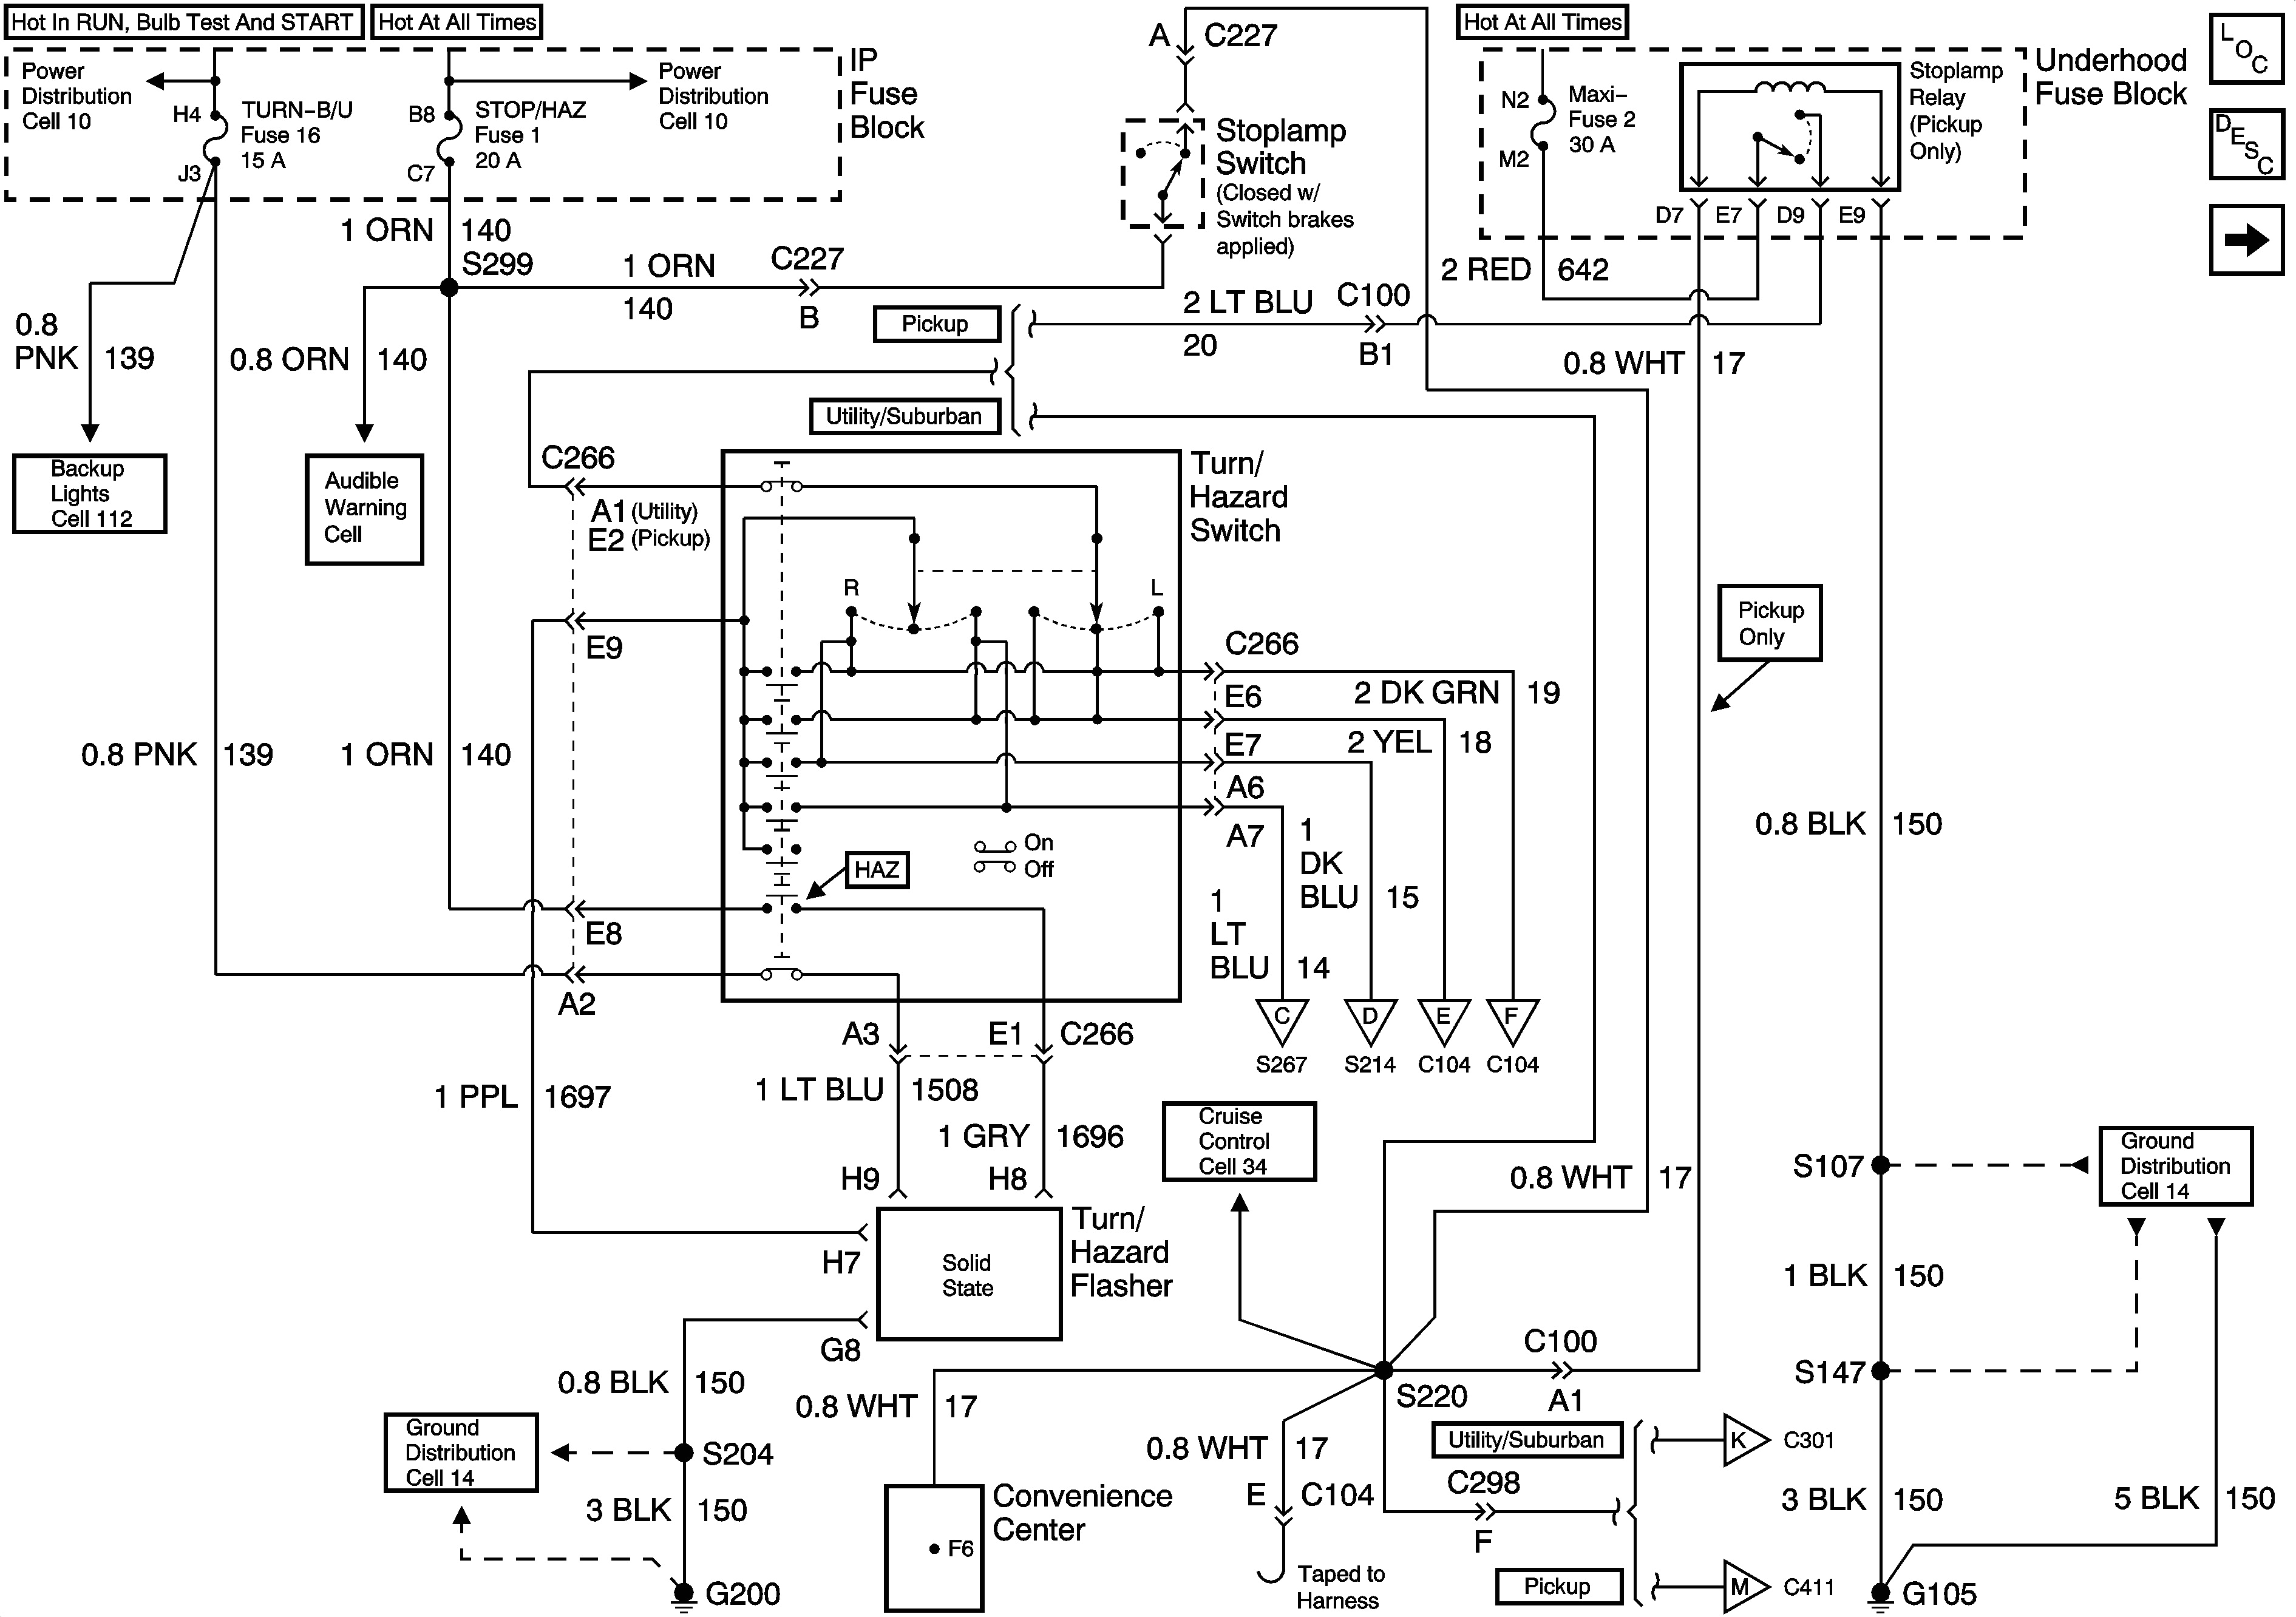 wiring diagram besides honda accord cooling system diagram likewise besides 1998 chevy s10 wiring harness diagram likewise 2001 chevy s10